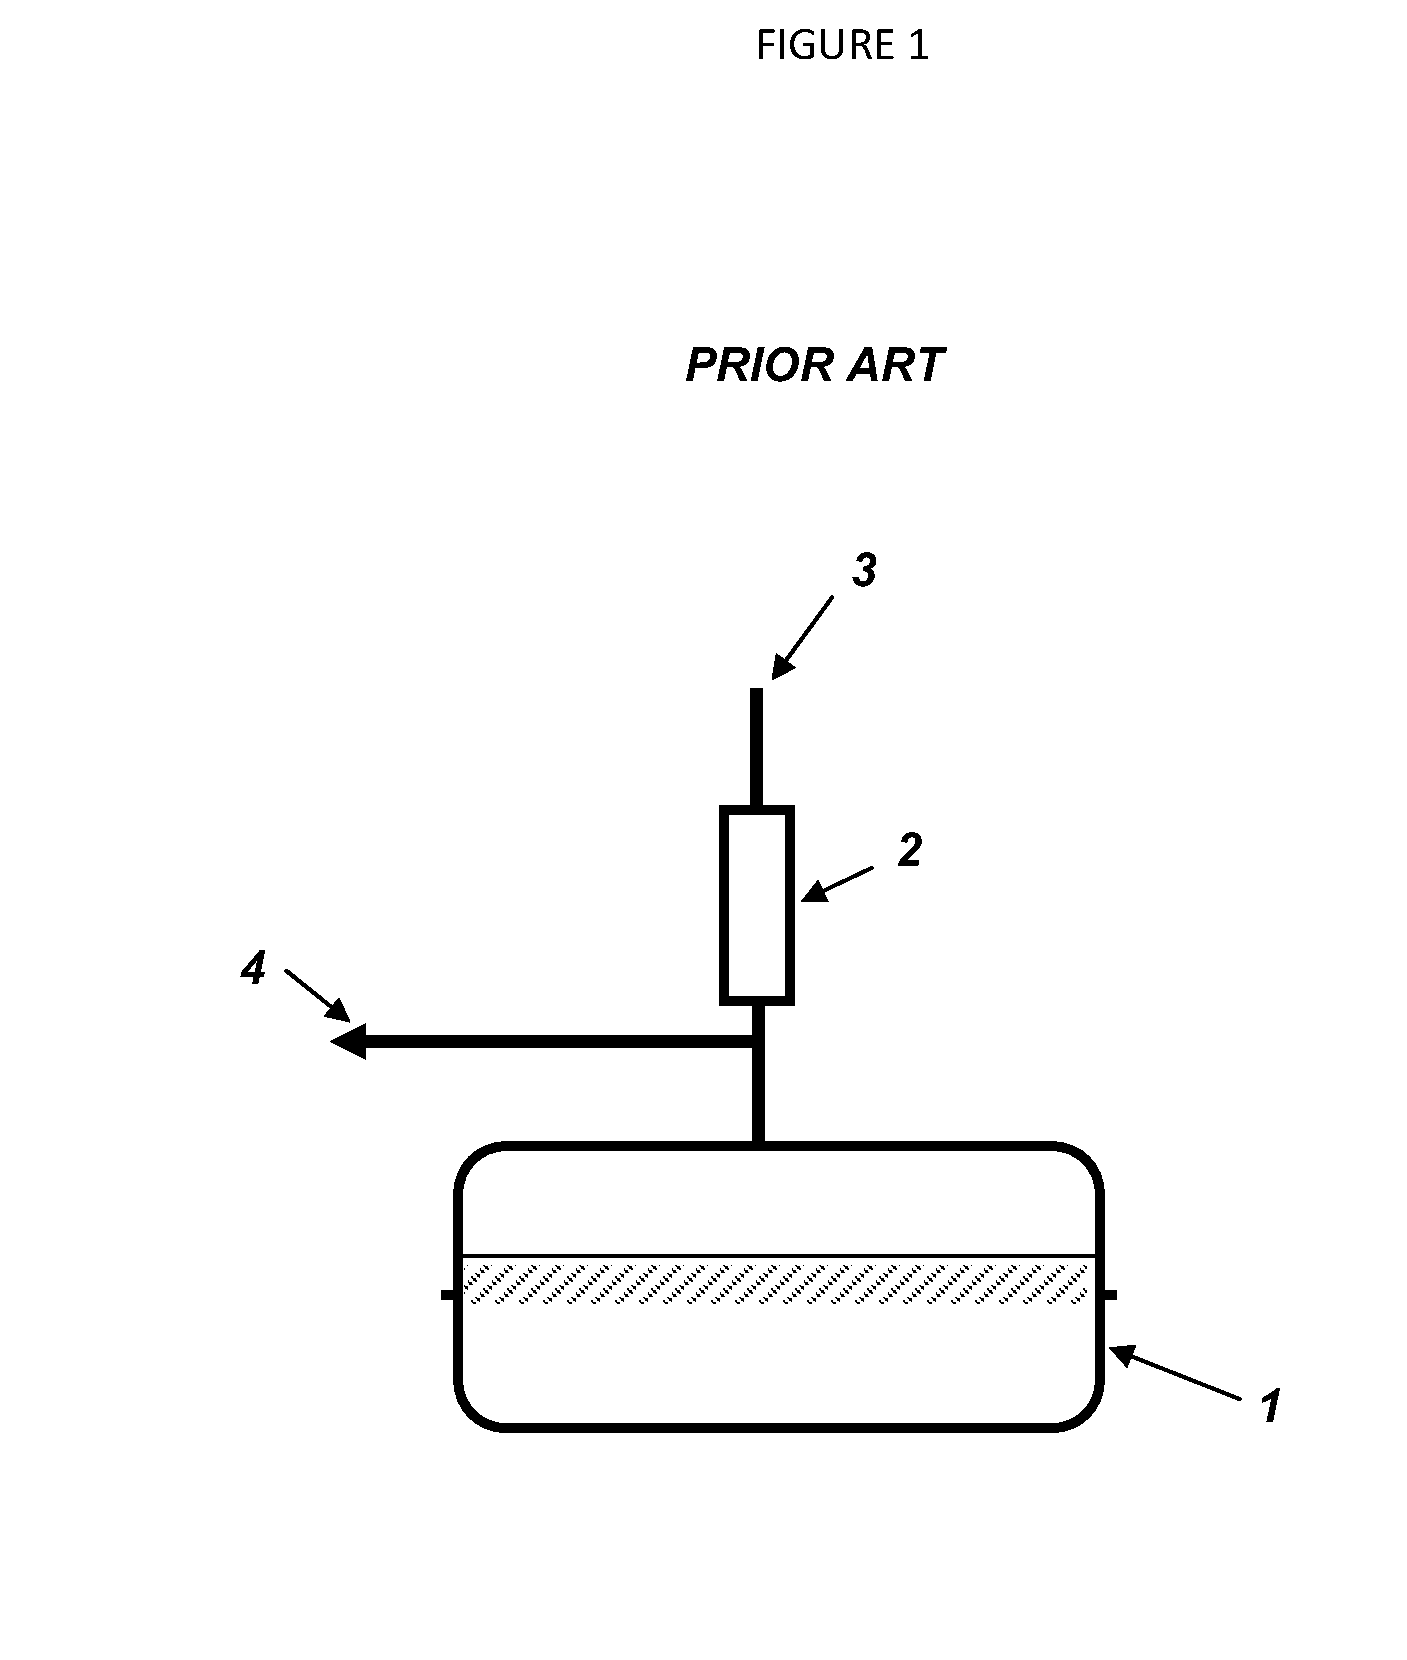 Method and system for reducing emissions from evaporative emissions